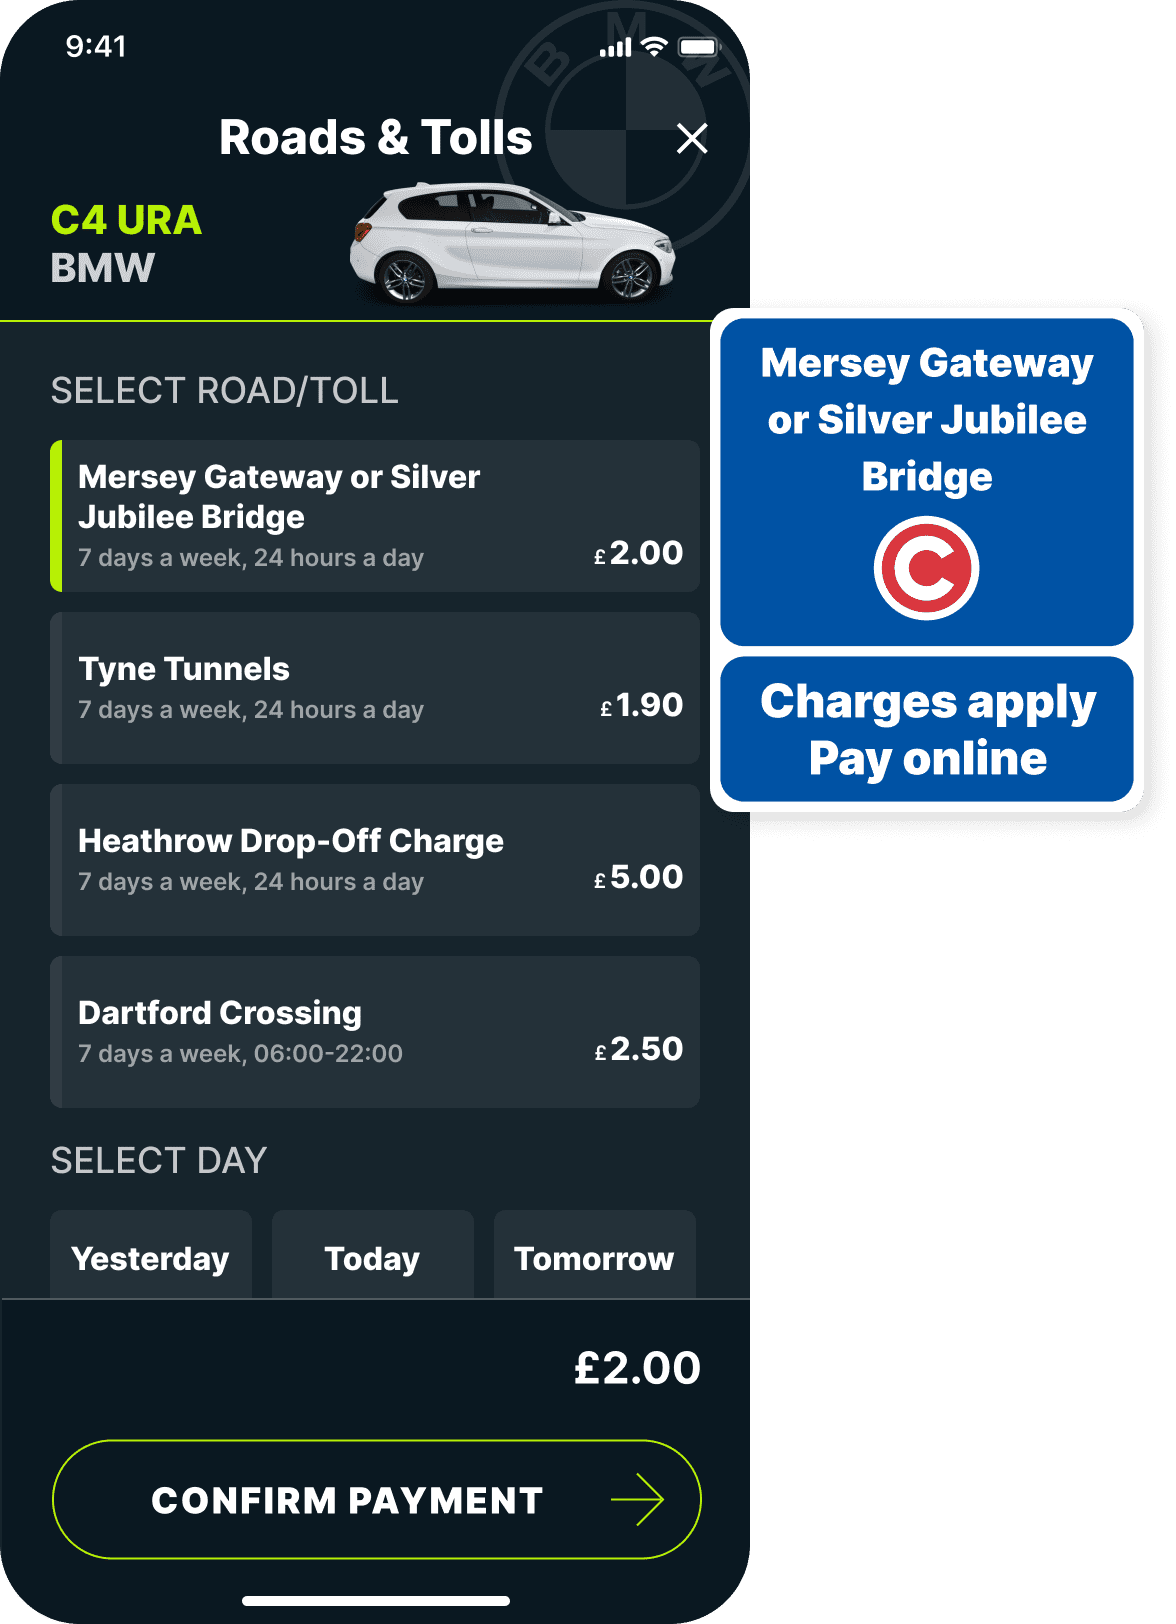 Mersey toll charge in the Caura app along with the toll road sign